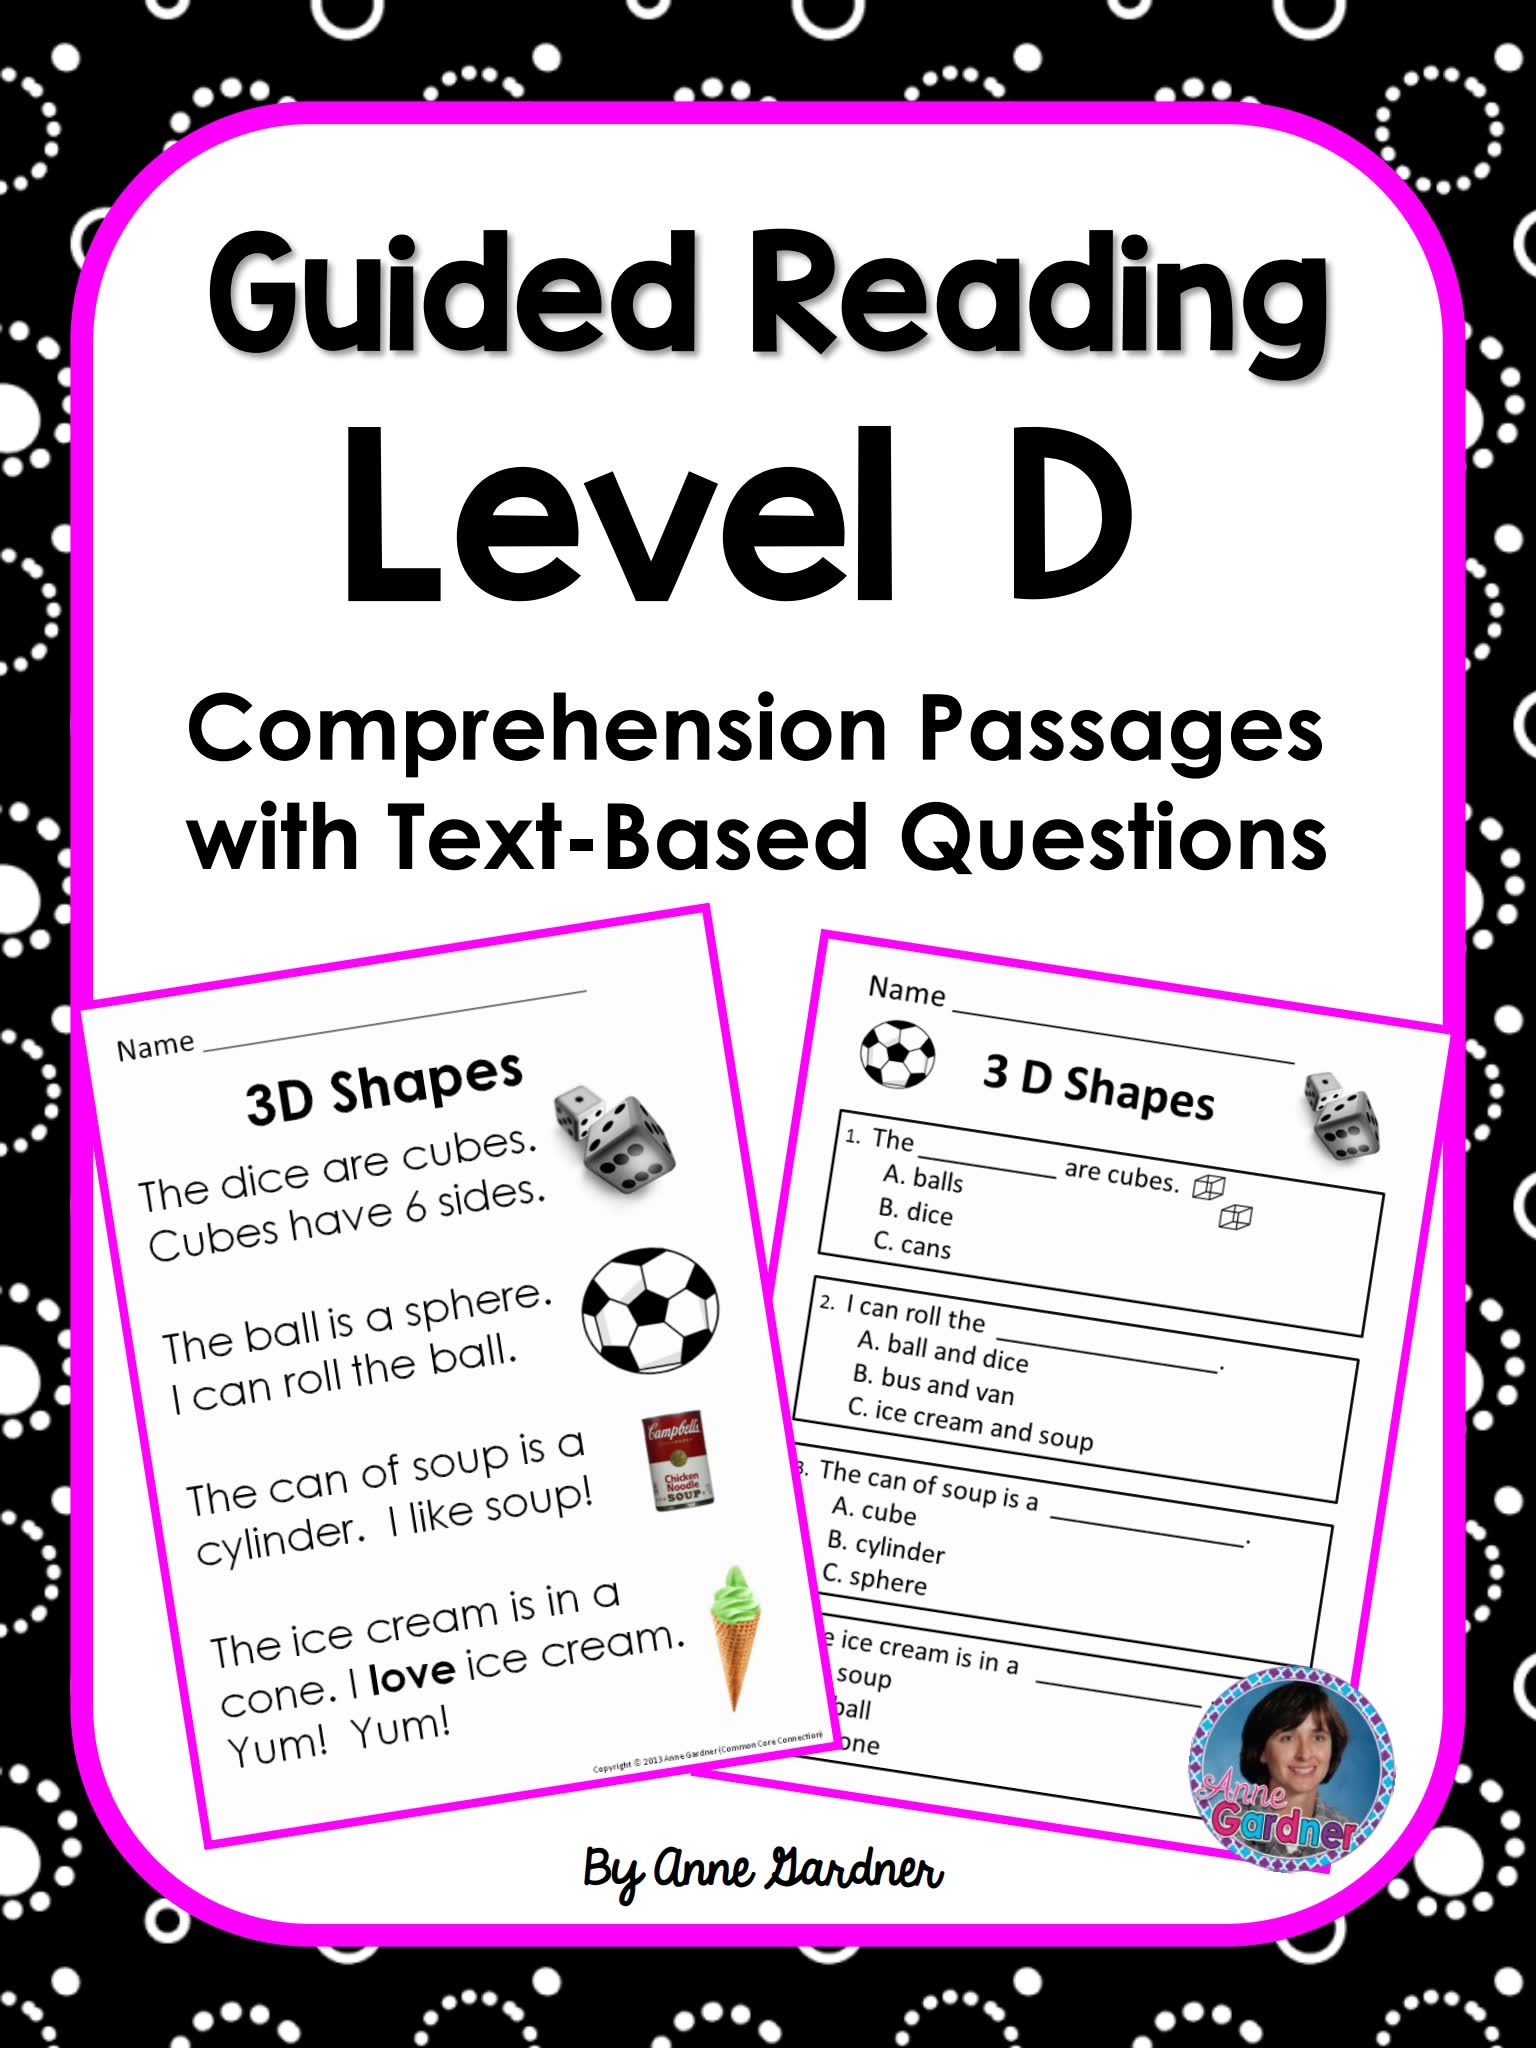 Guided-Reading4